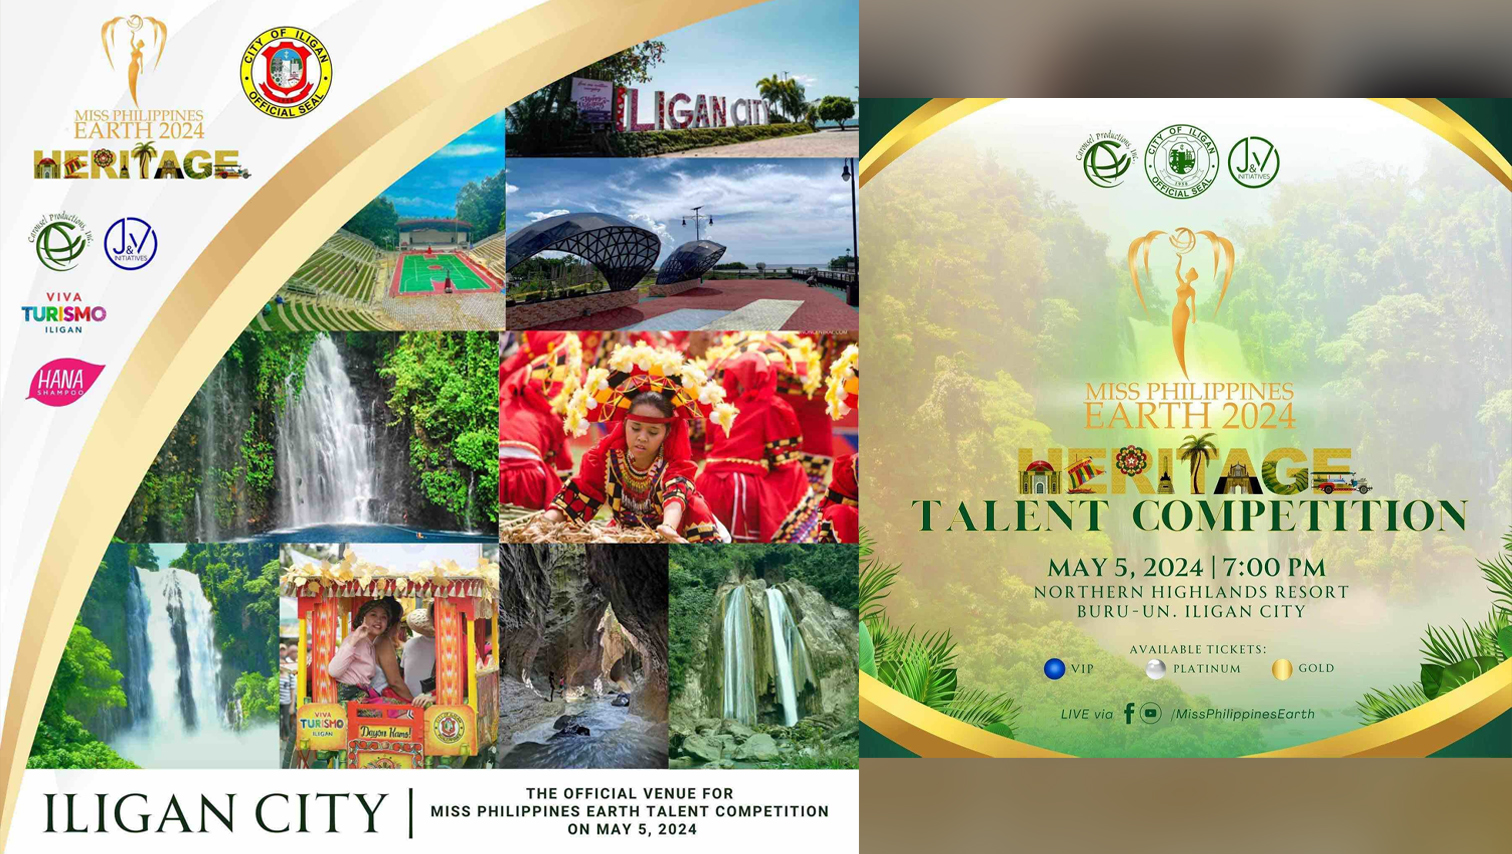 Iligan City hosts Miss Philippines Earth 2024 Talent Competition